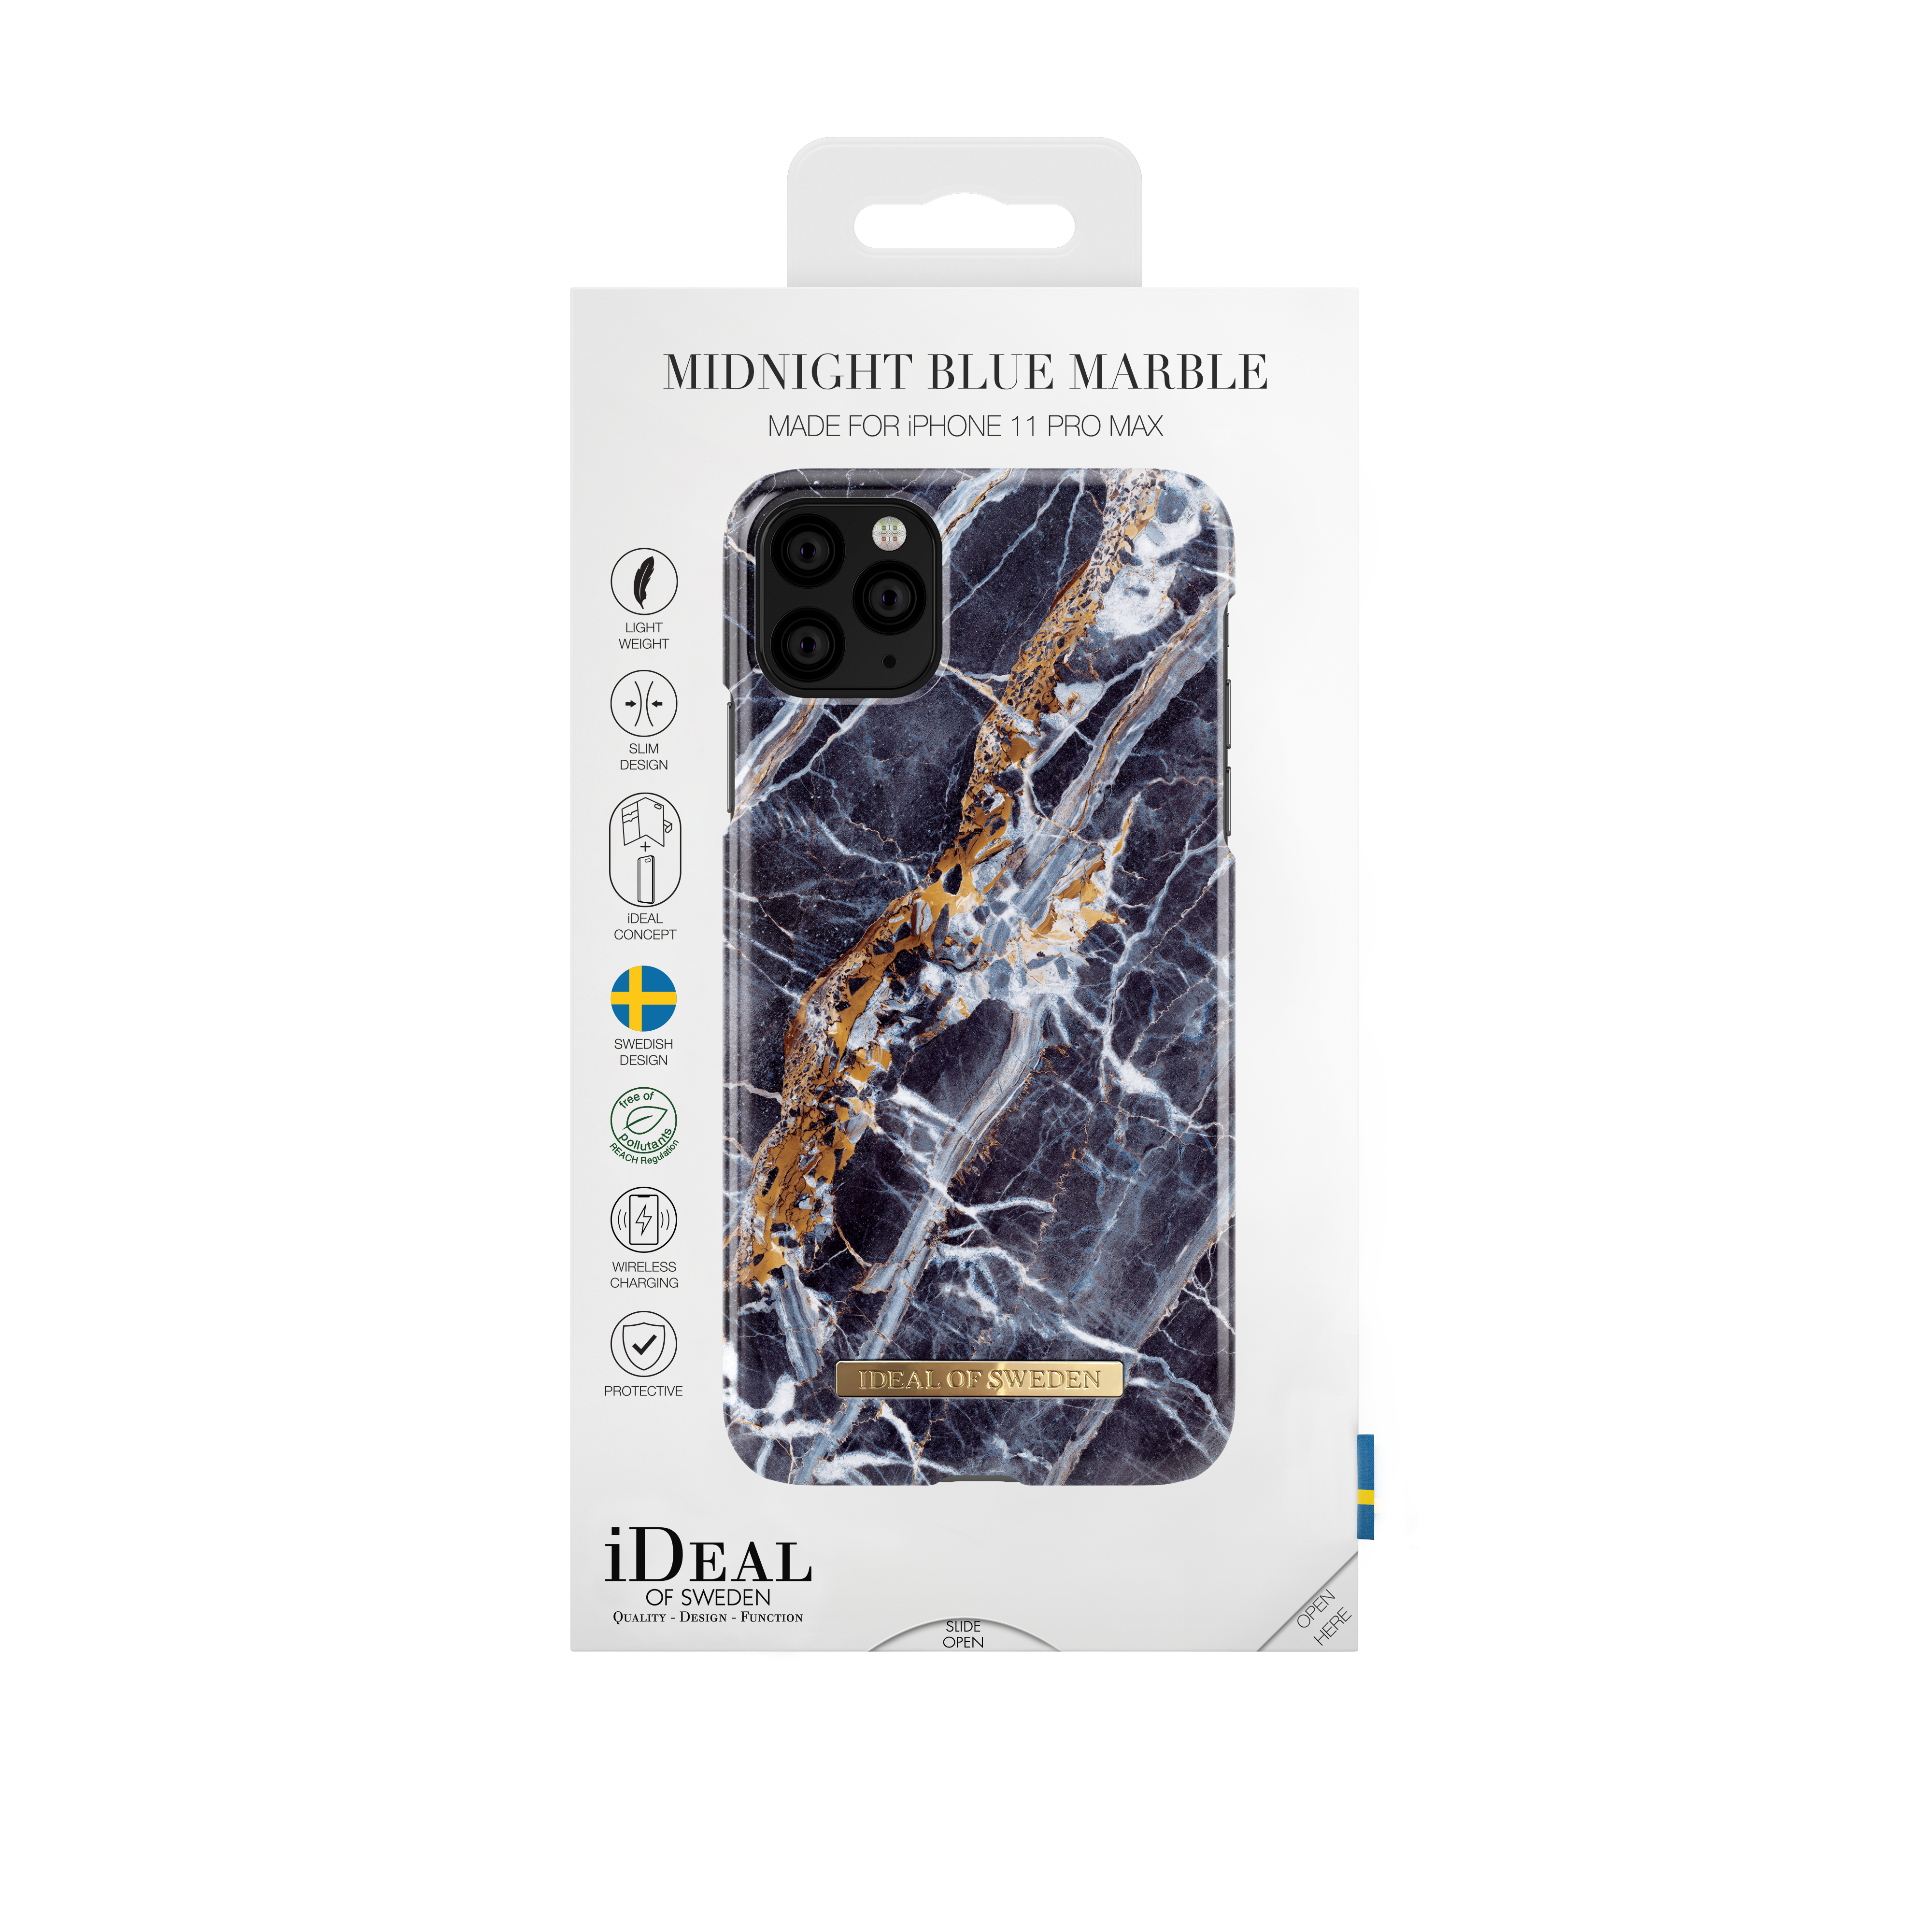 Max, iPhone Blue Marble Backcover, OF XS 11 Midnight Pro IDFCS17-I1965-66, SWEDEN Max, iPhone IDEAL Apple,